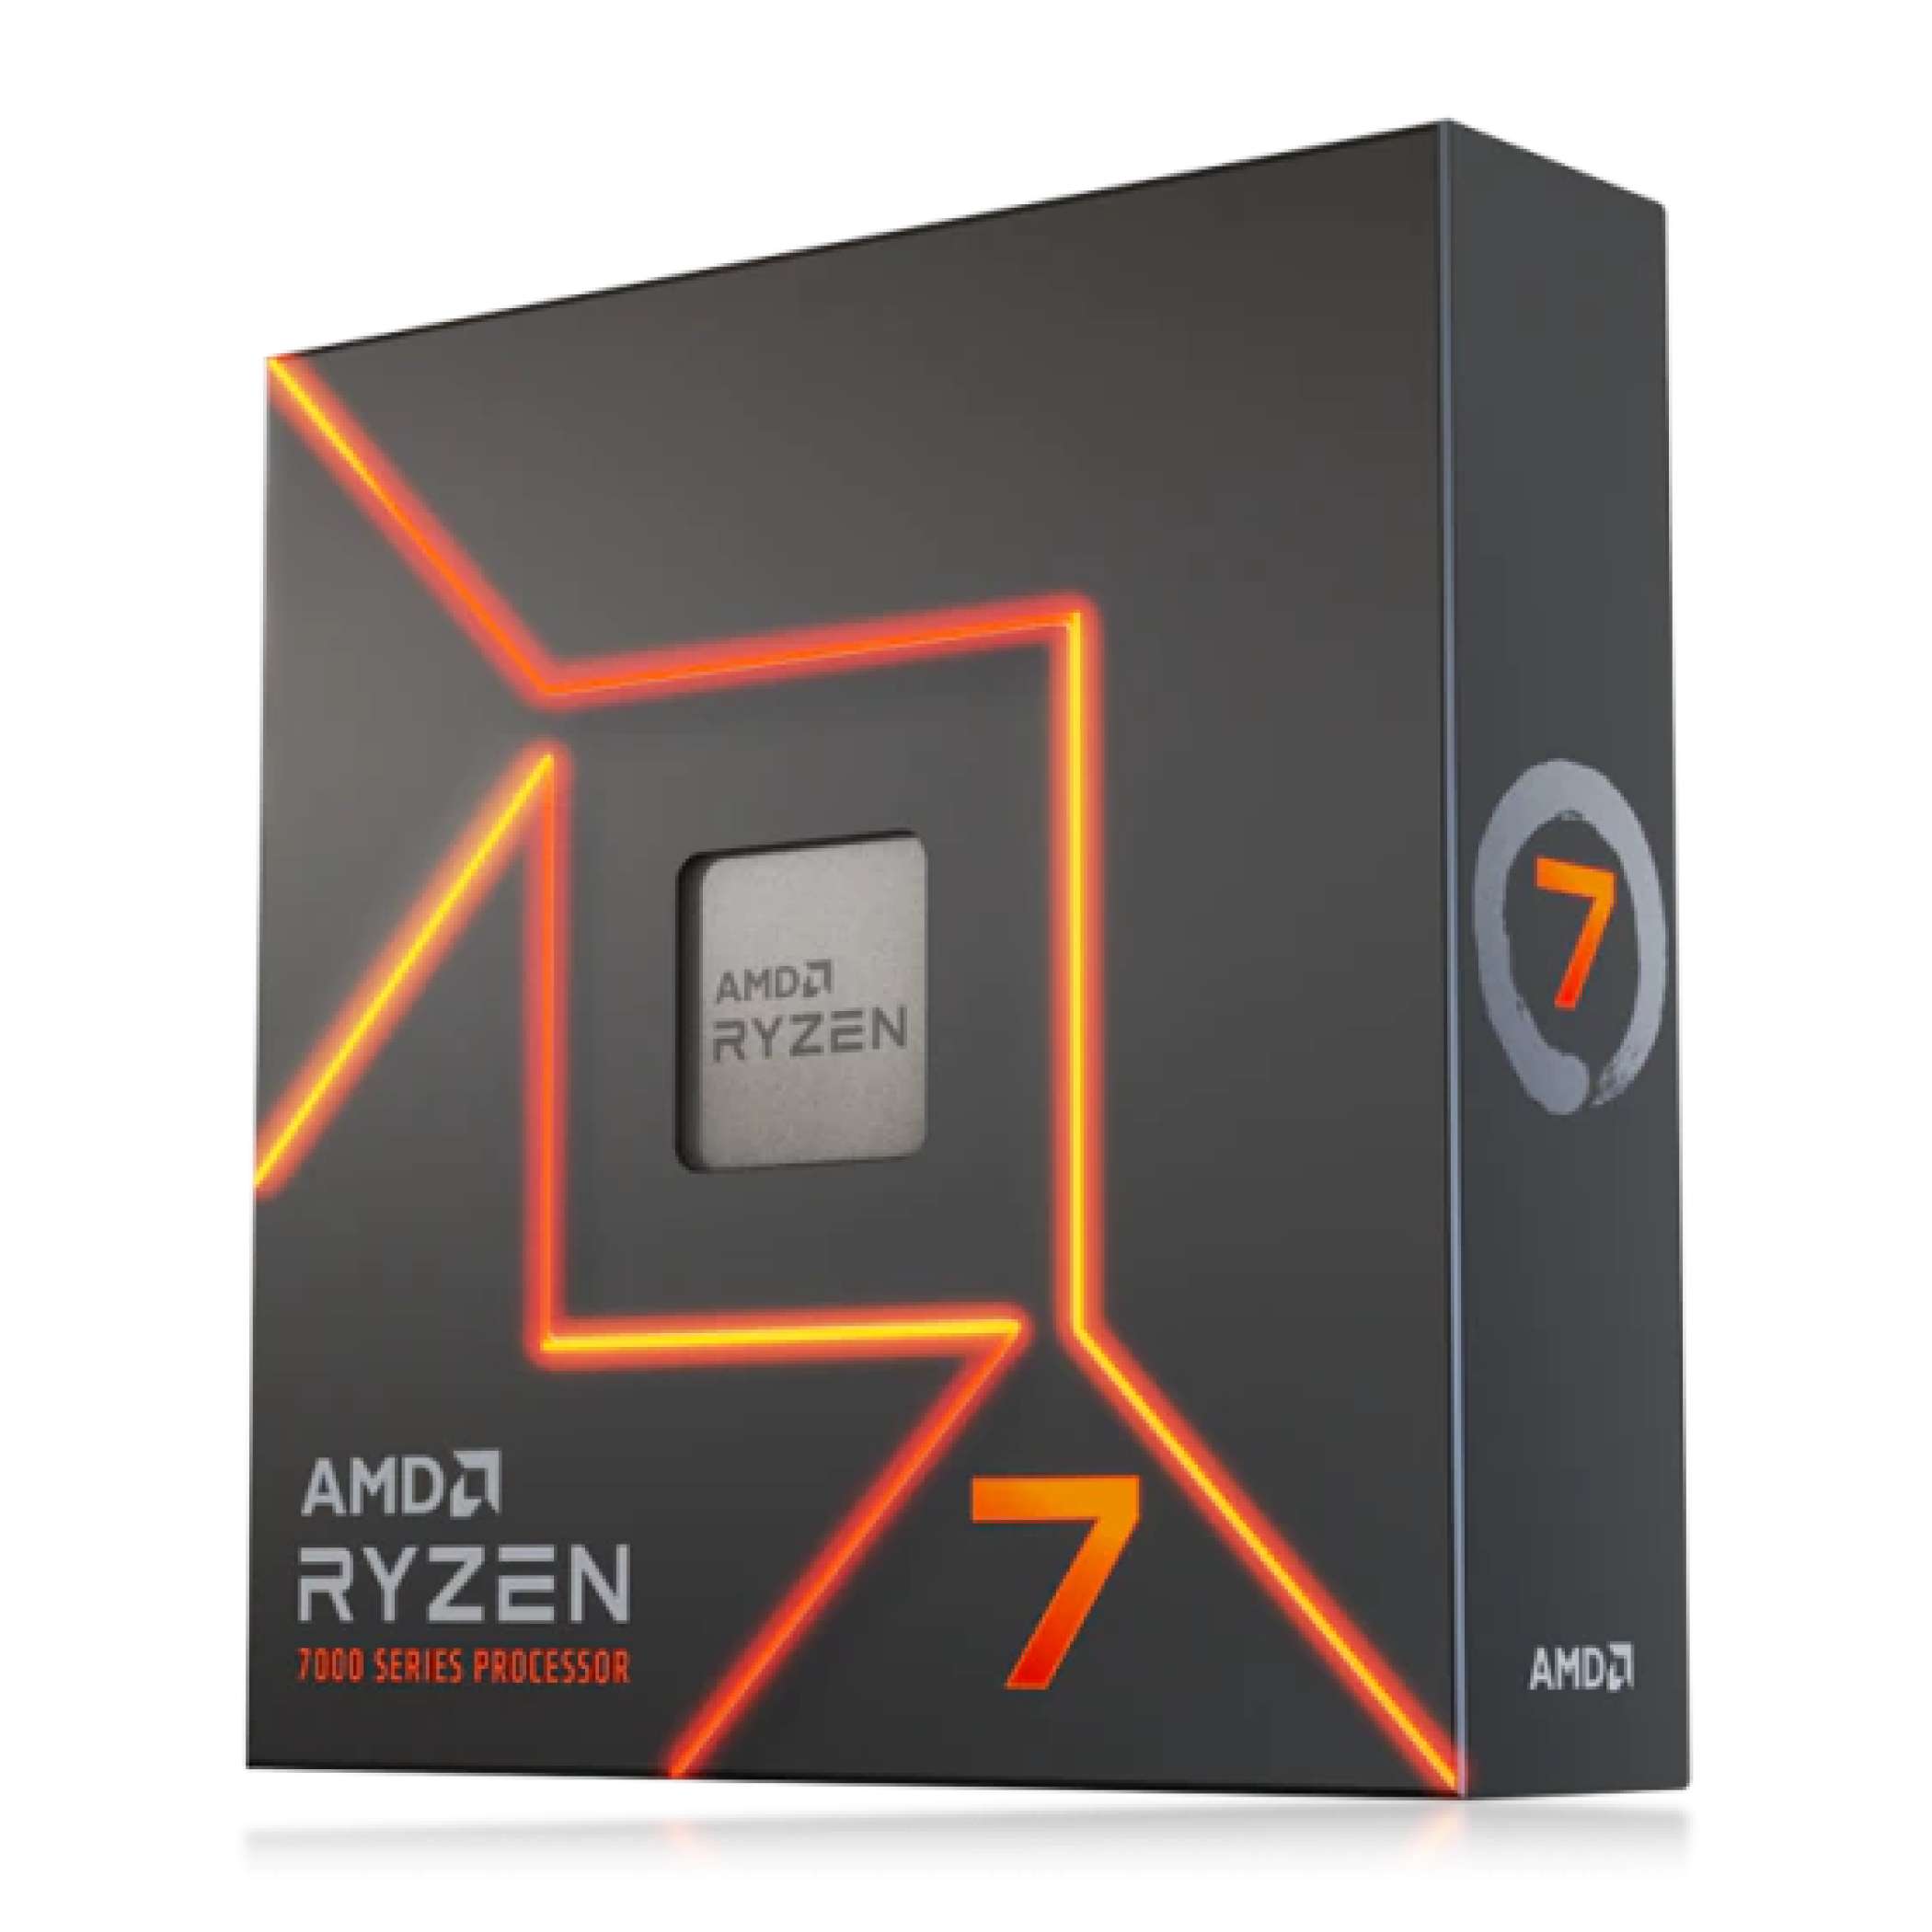 Premium AMD gaming PC guide: Best parts for a high-end AMD build